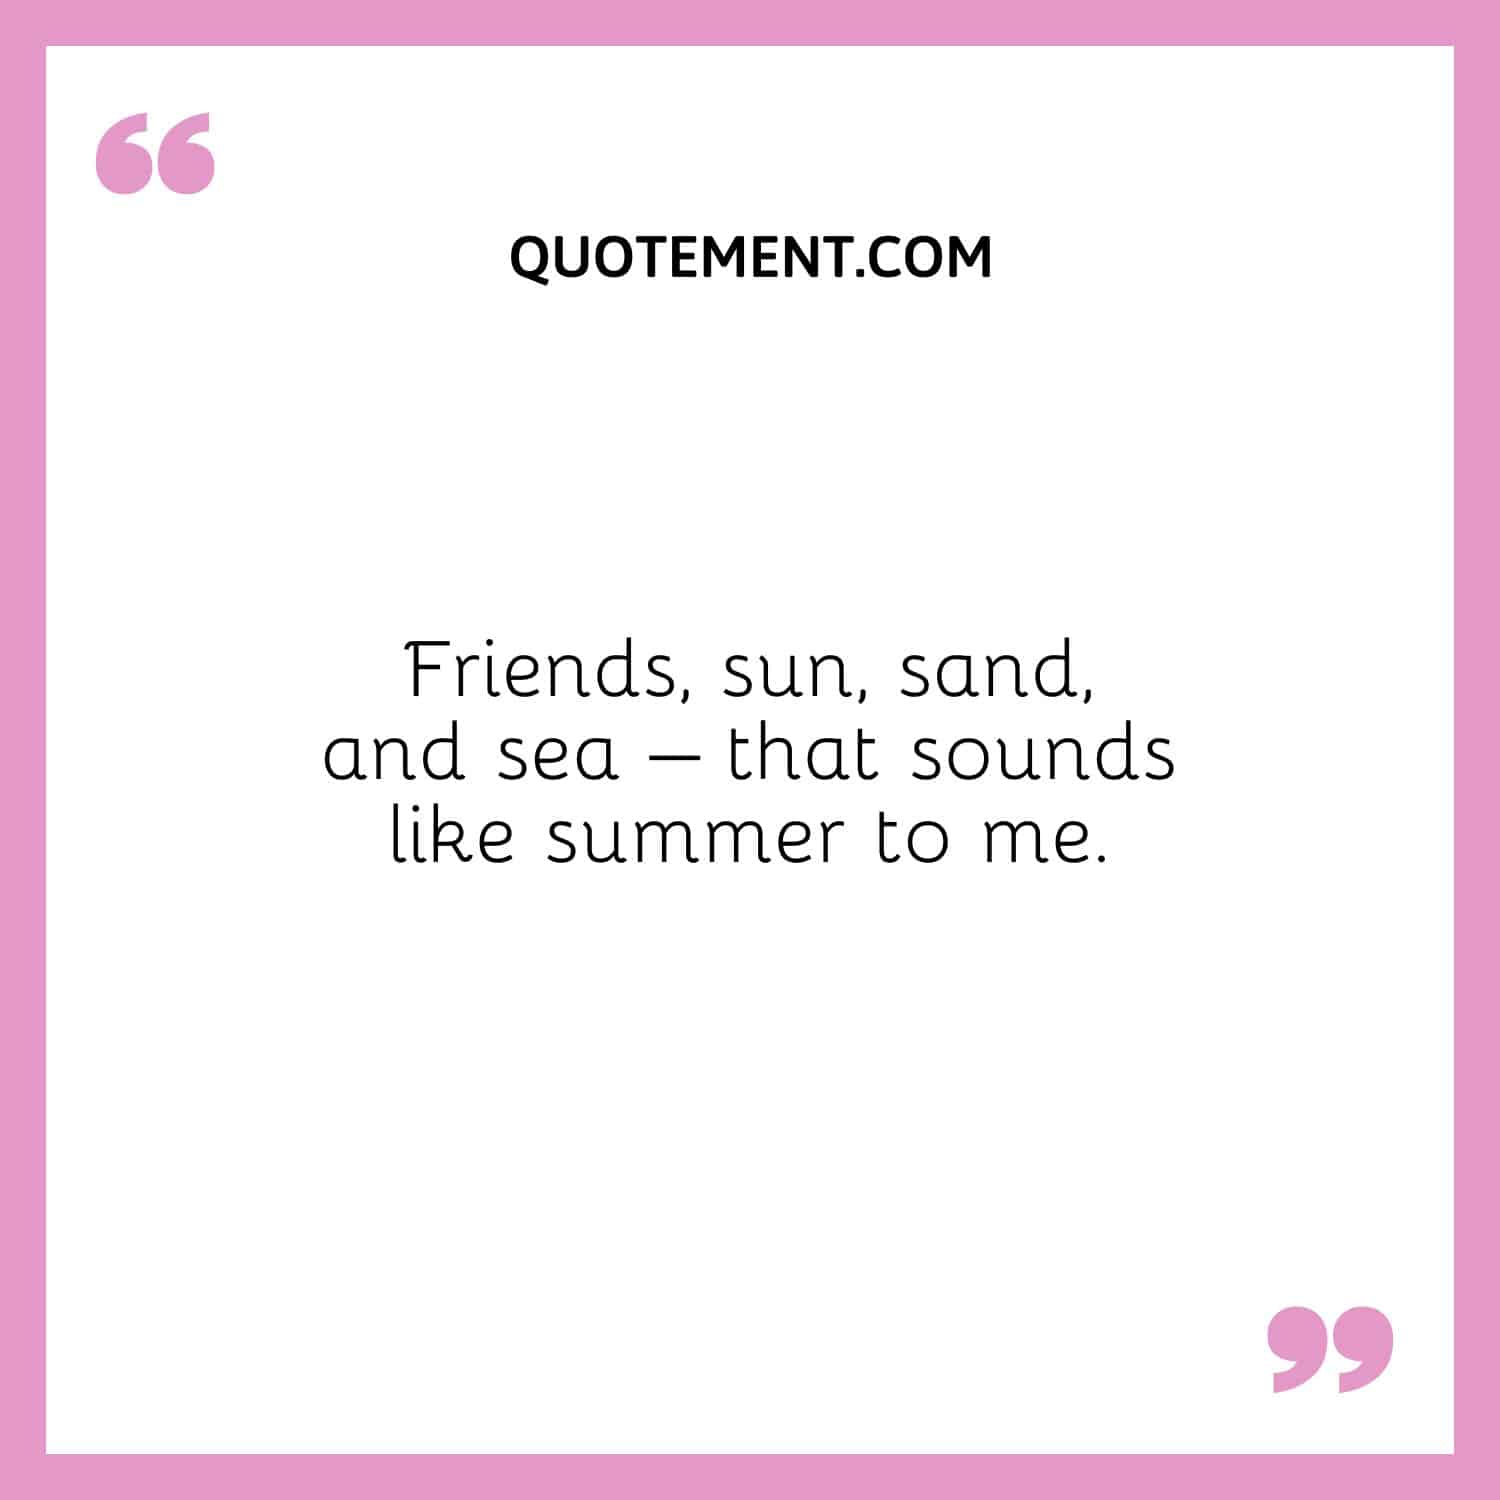 Friends, sun, sand, and sea – that sounds like summer to me.